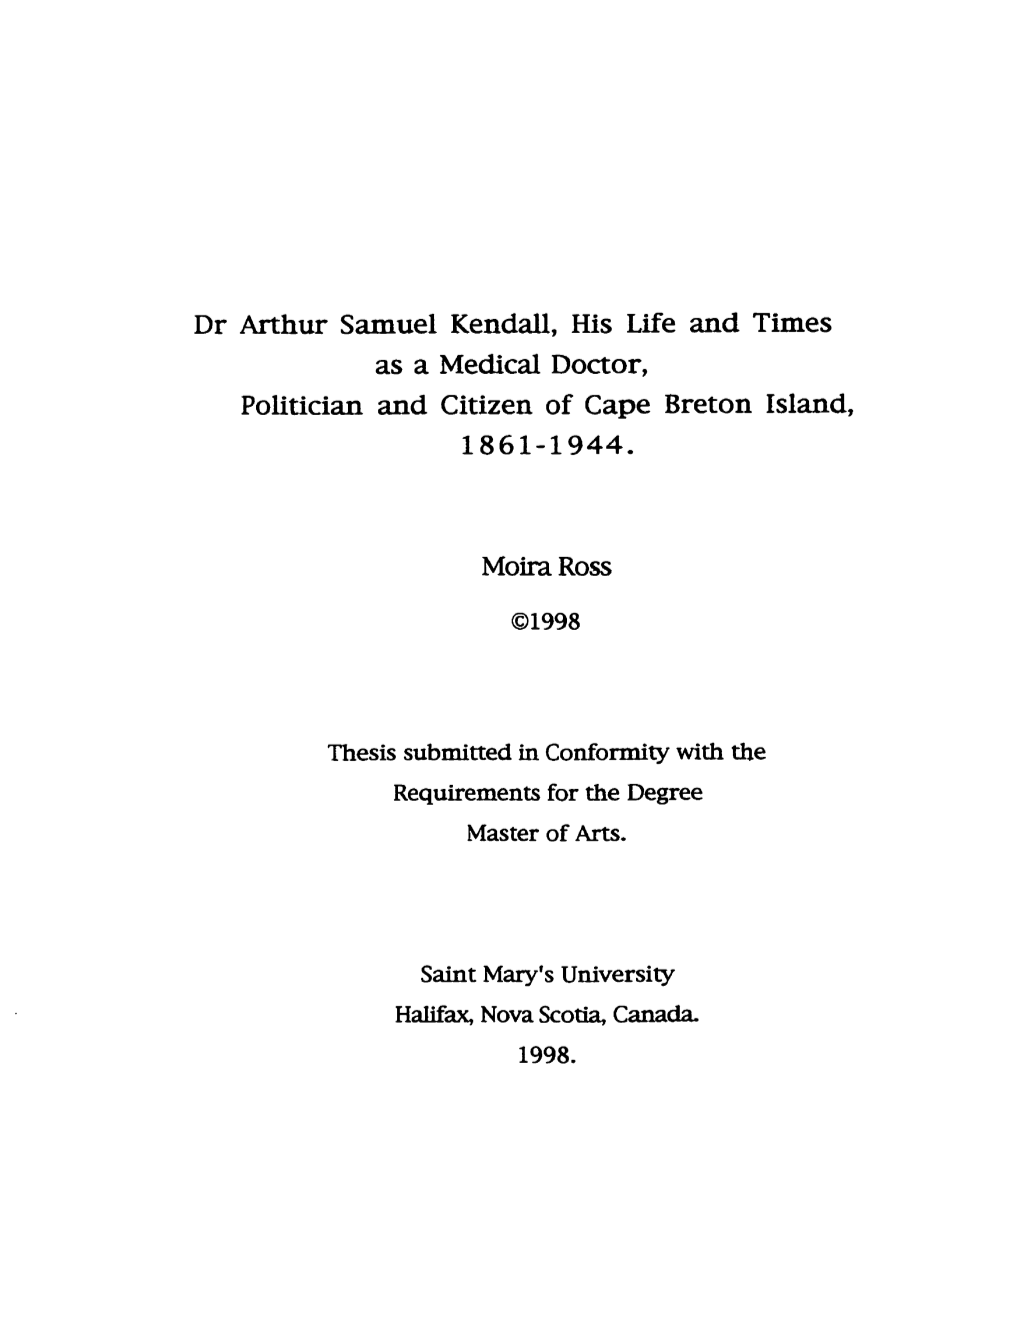 Dr Arthur Samuel Kendall, His Life and Times As a Medical Doaor, Politician and Citizen of Cape Breton Island, 1861-1944